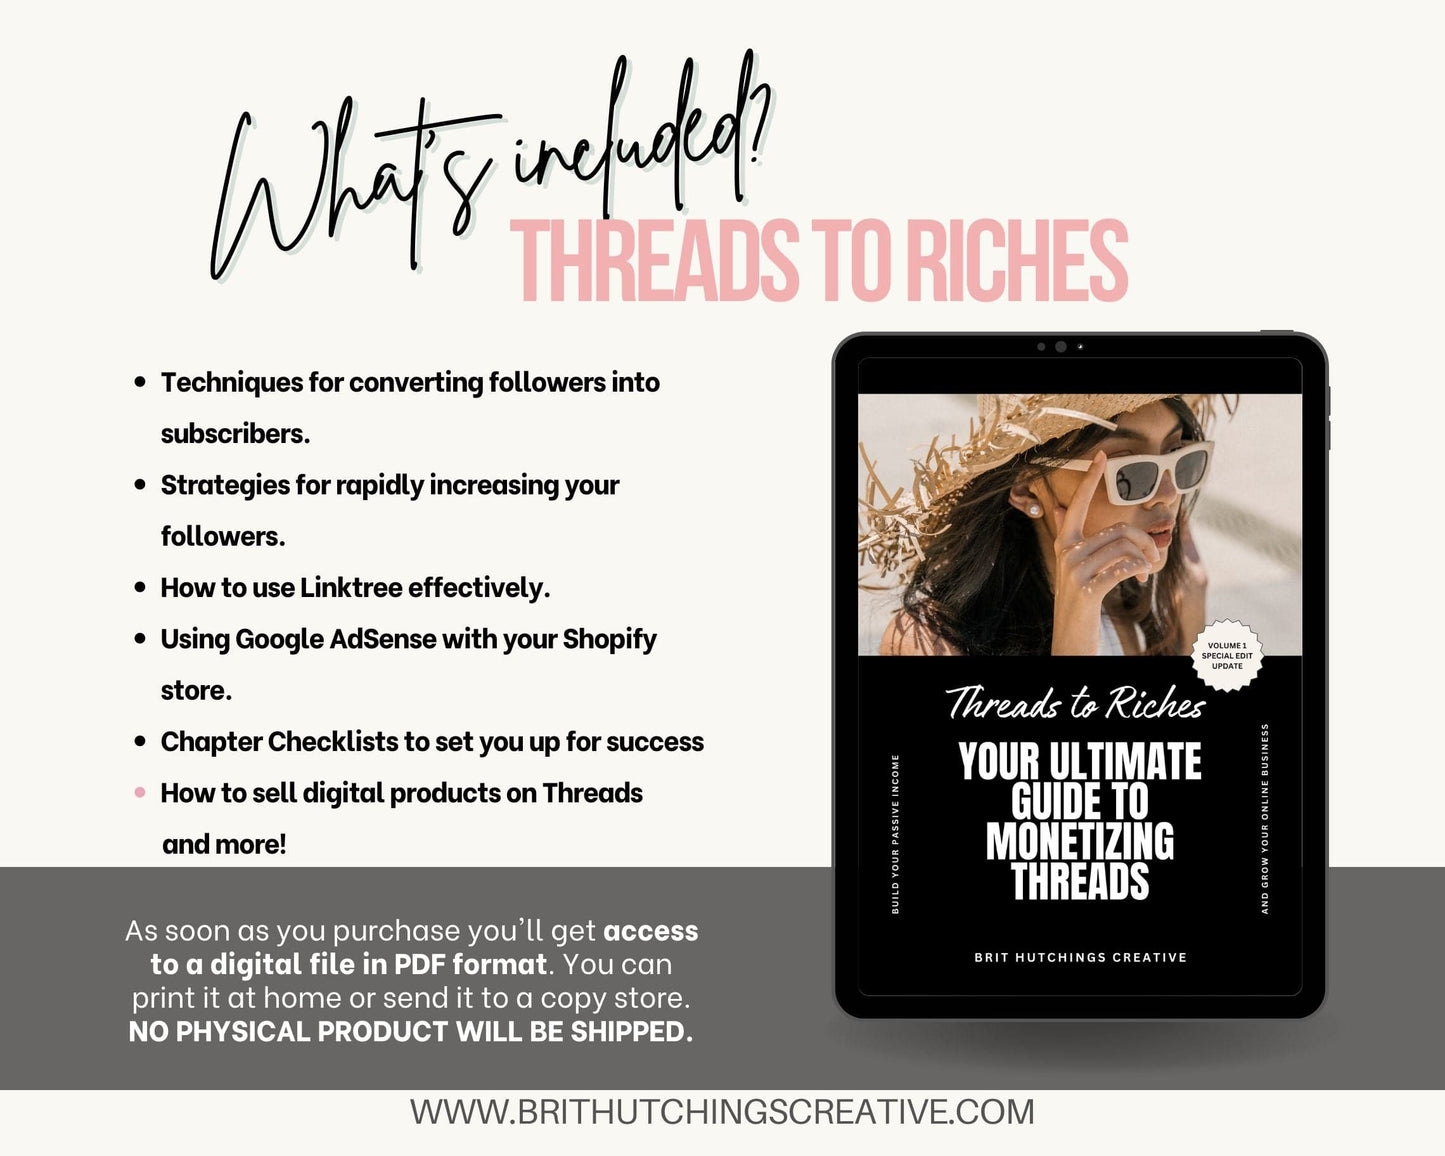 Threads to Riches- The Ultimate Guide to Monetizing Threads